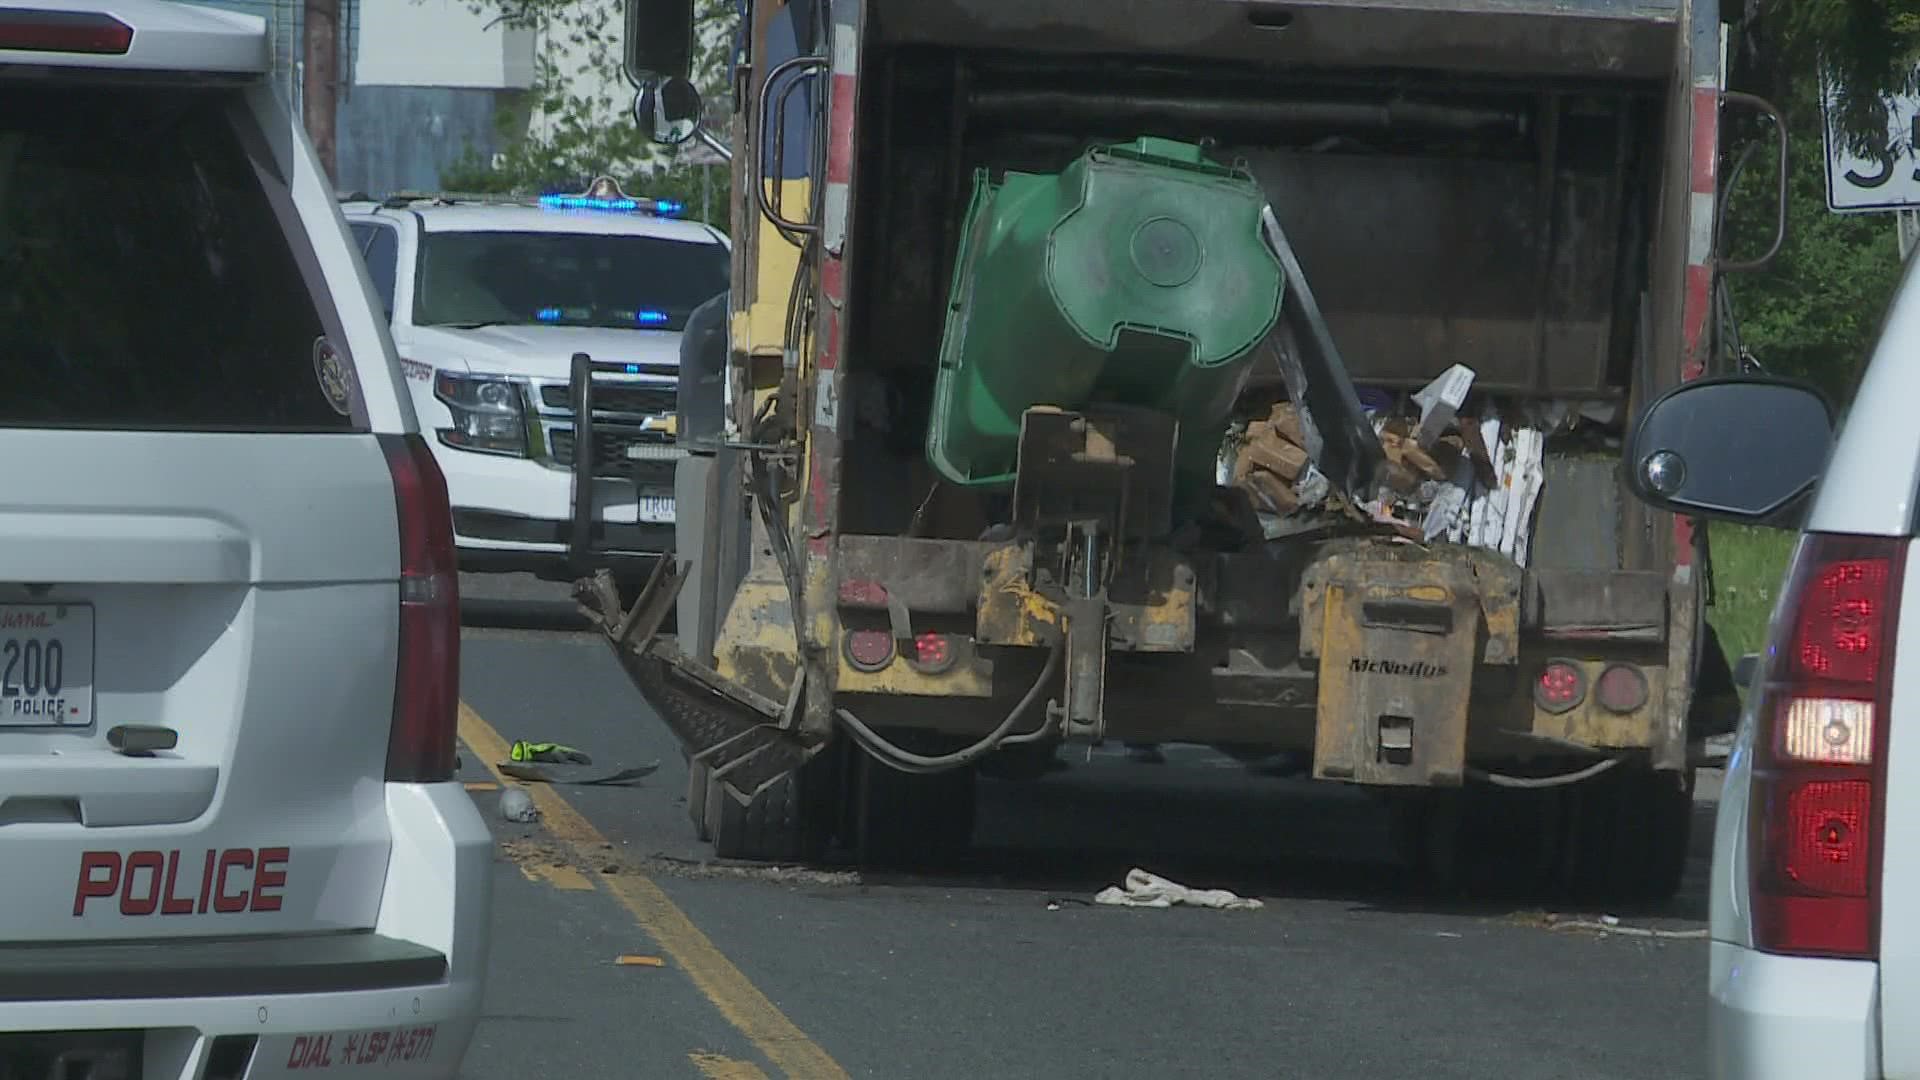 A worker on a trash pickup detail lost his leg when another car pinned him against the garbage truck. Police say the car's driver was texting.